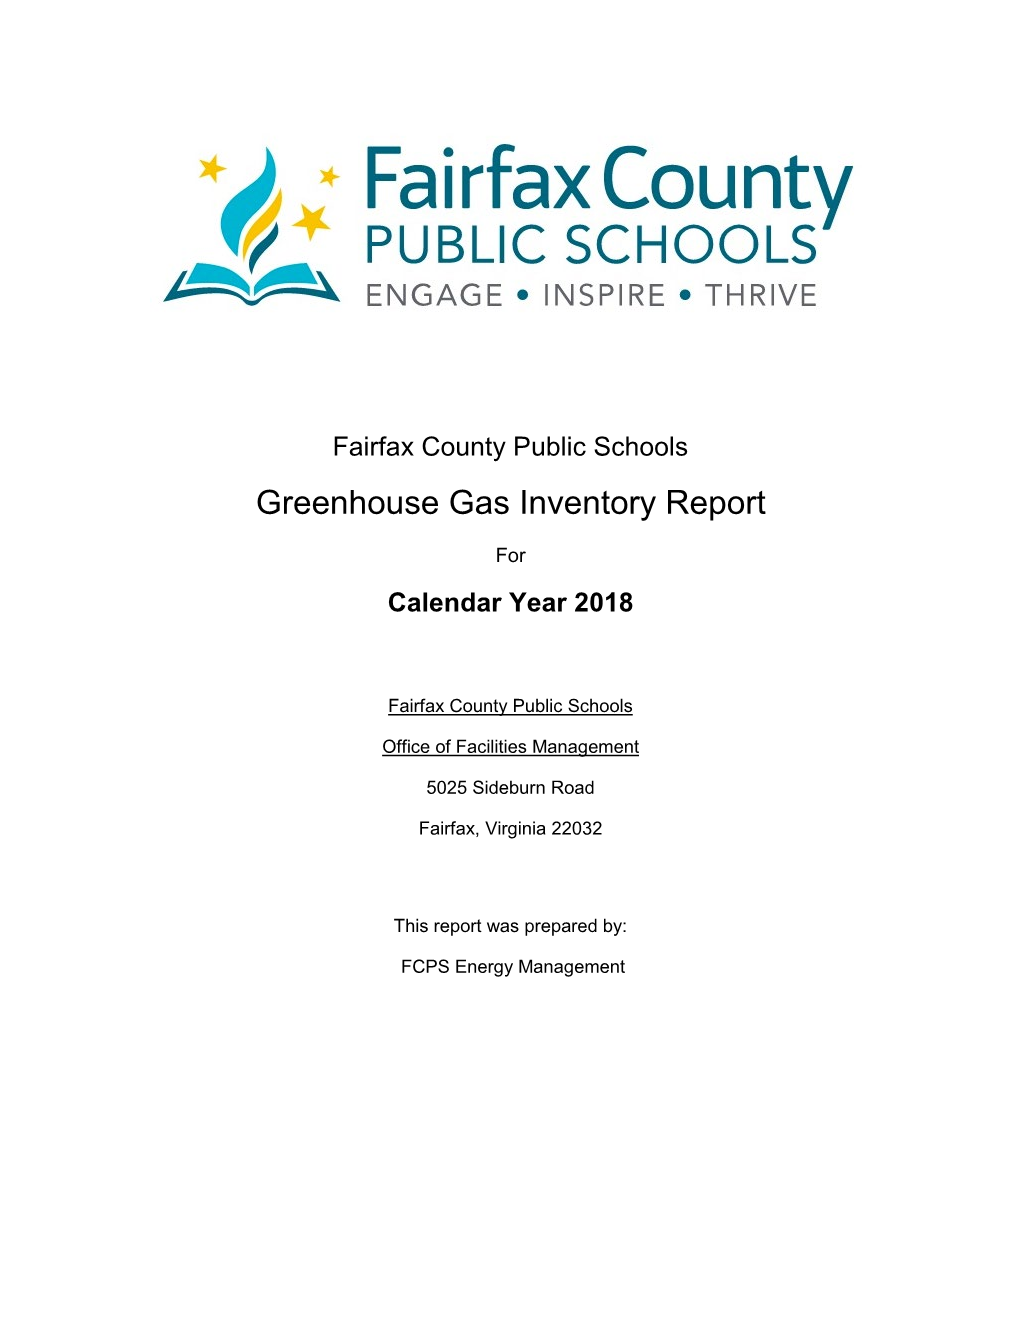 Greenhouse Gas Inventory Report Calendar Year 2018